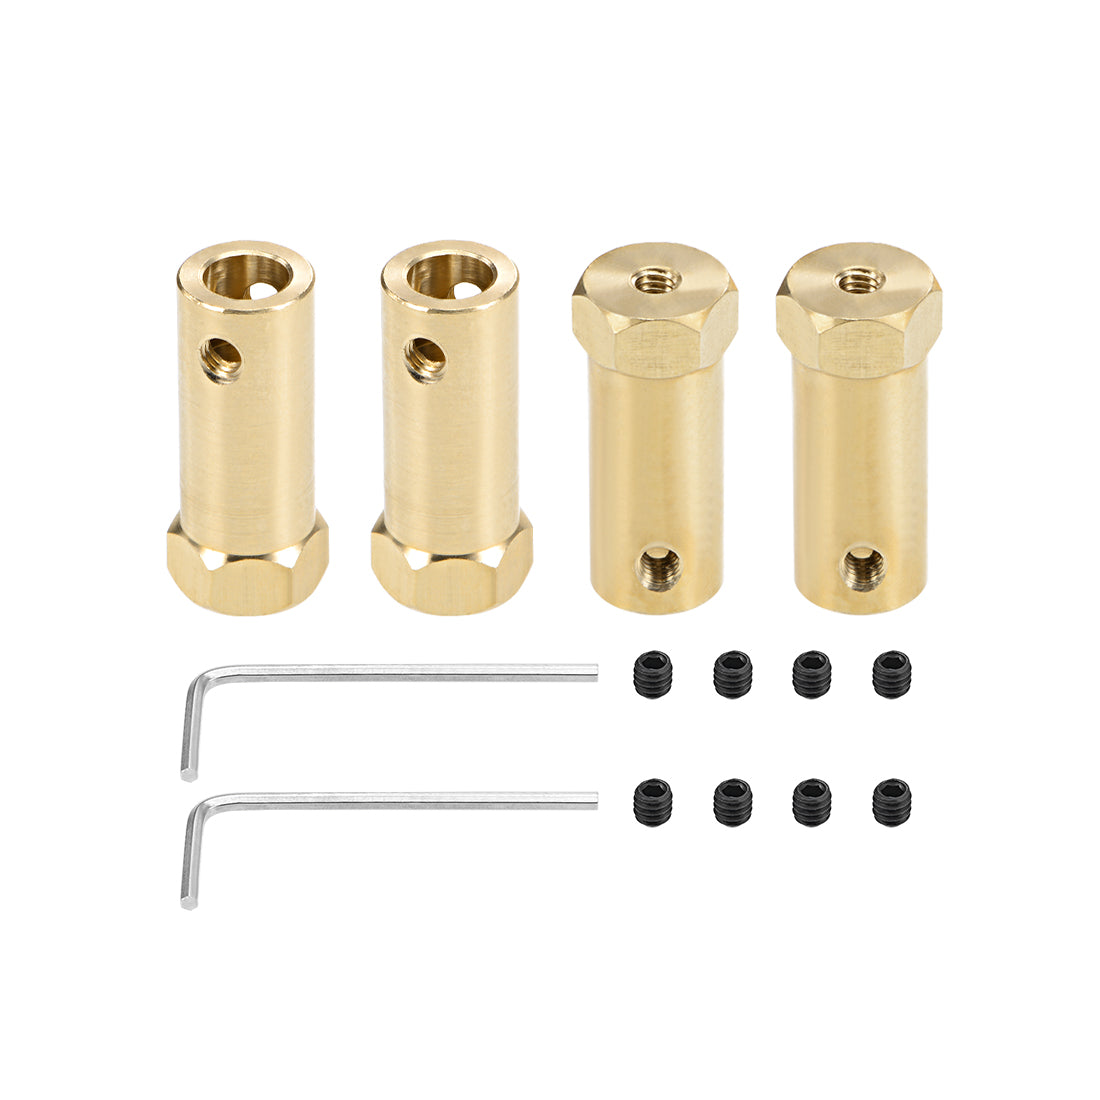 Uxcell Uxcell Hex Coupler 7mm Bore Motor Hex Brass Shaft Coupling Flexible Connector for Car Wheels Tires Shaft Motor 4pcs